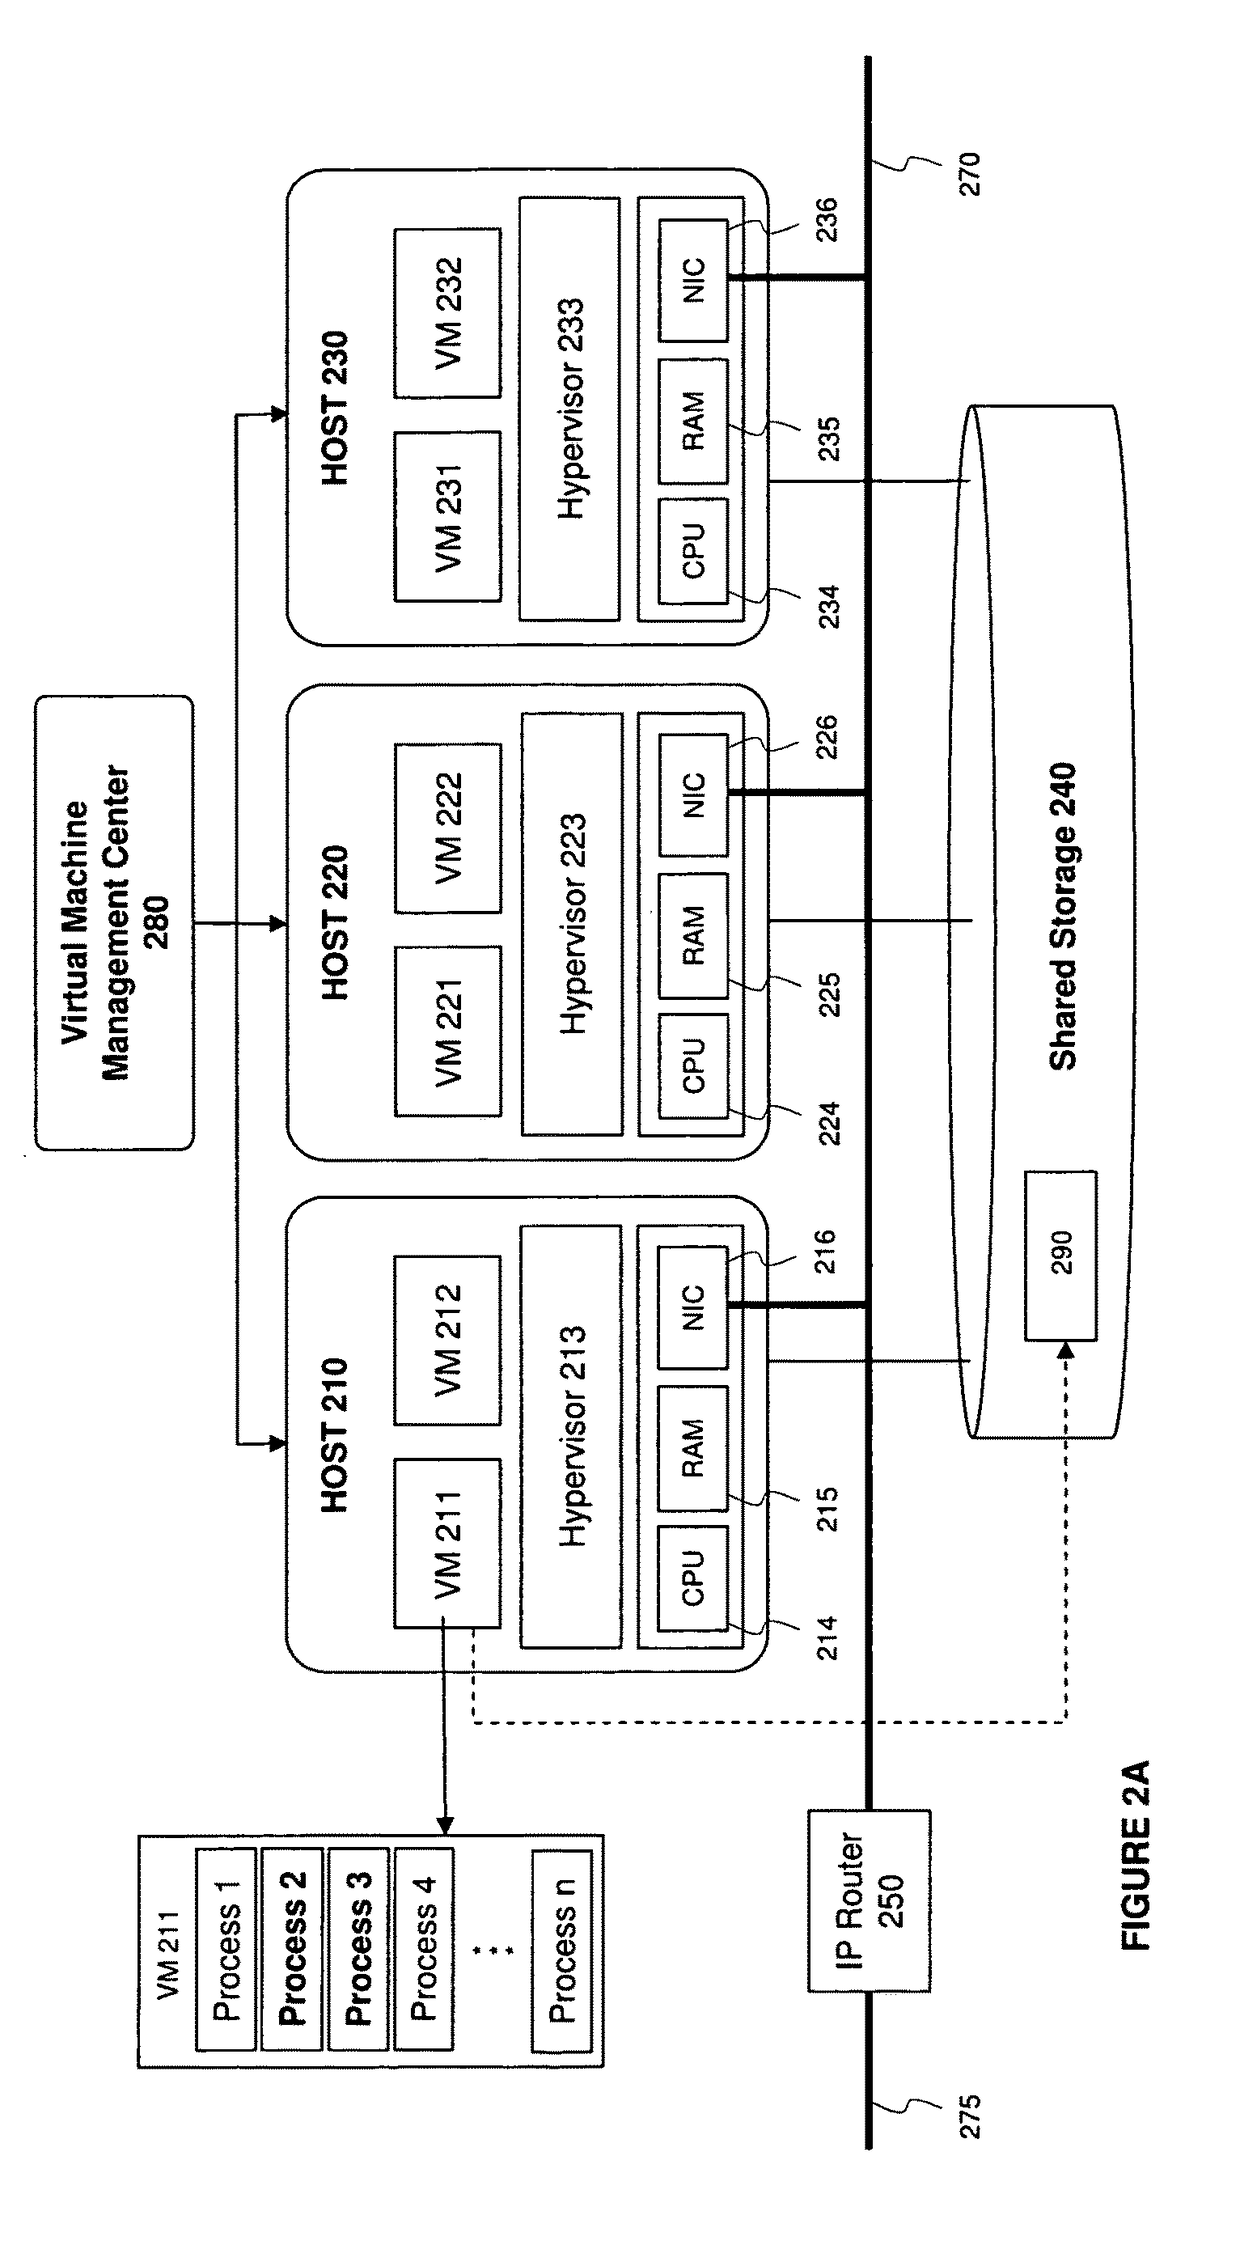 Method and system for migrating processes between virtual machines